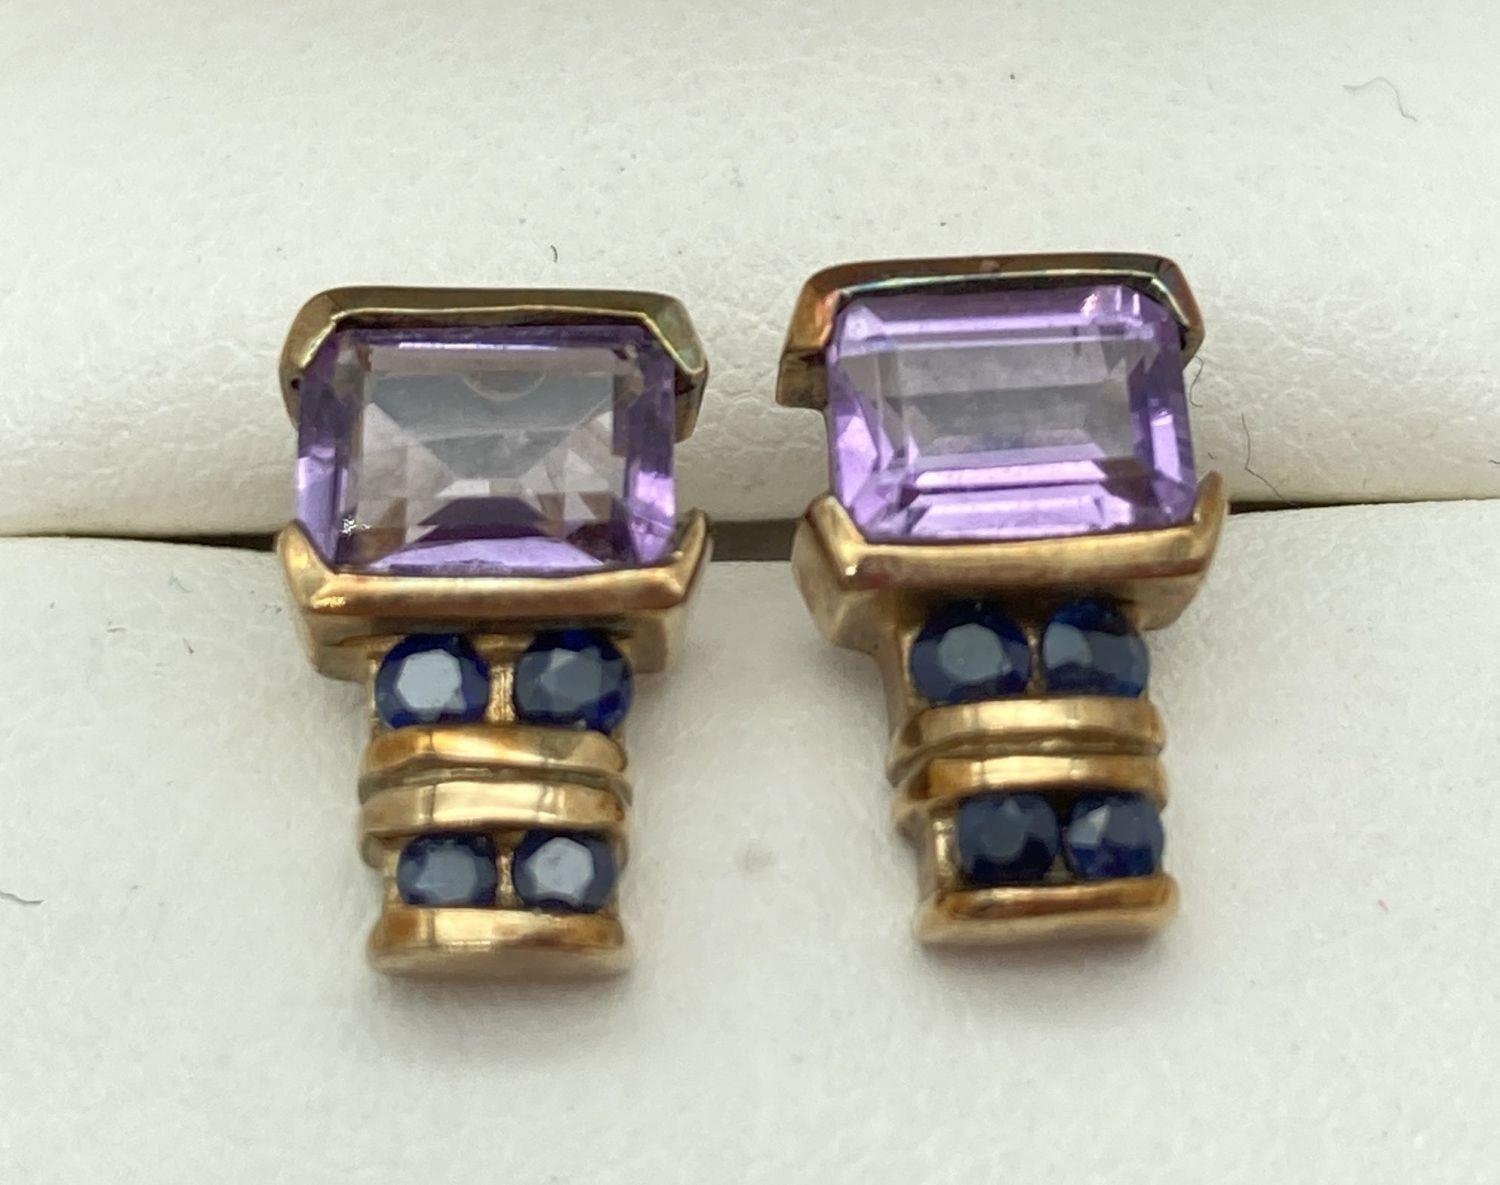 A pair of 9ct gold, amethyst and sapphire stud style earrings. Each earring set with a square cut